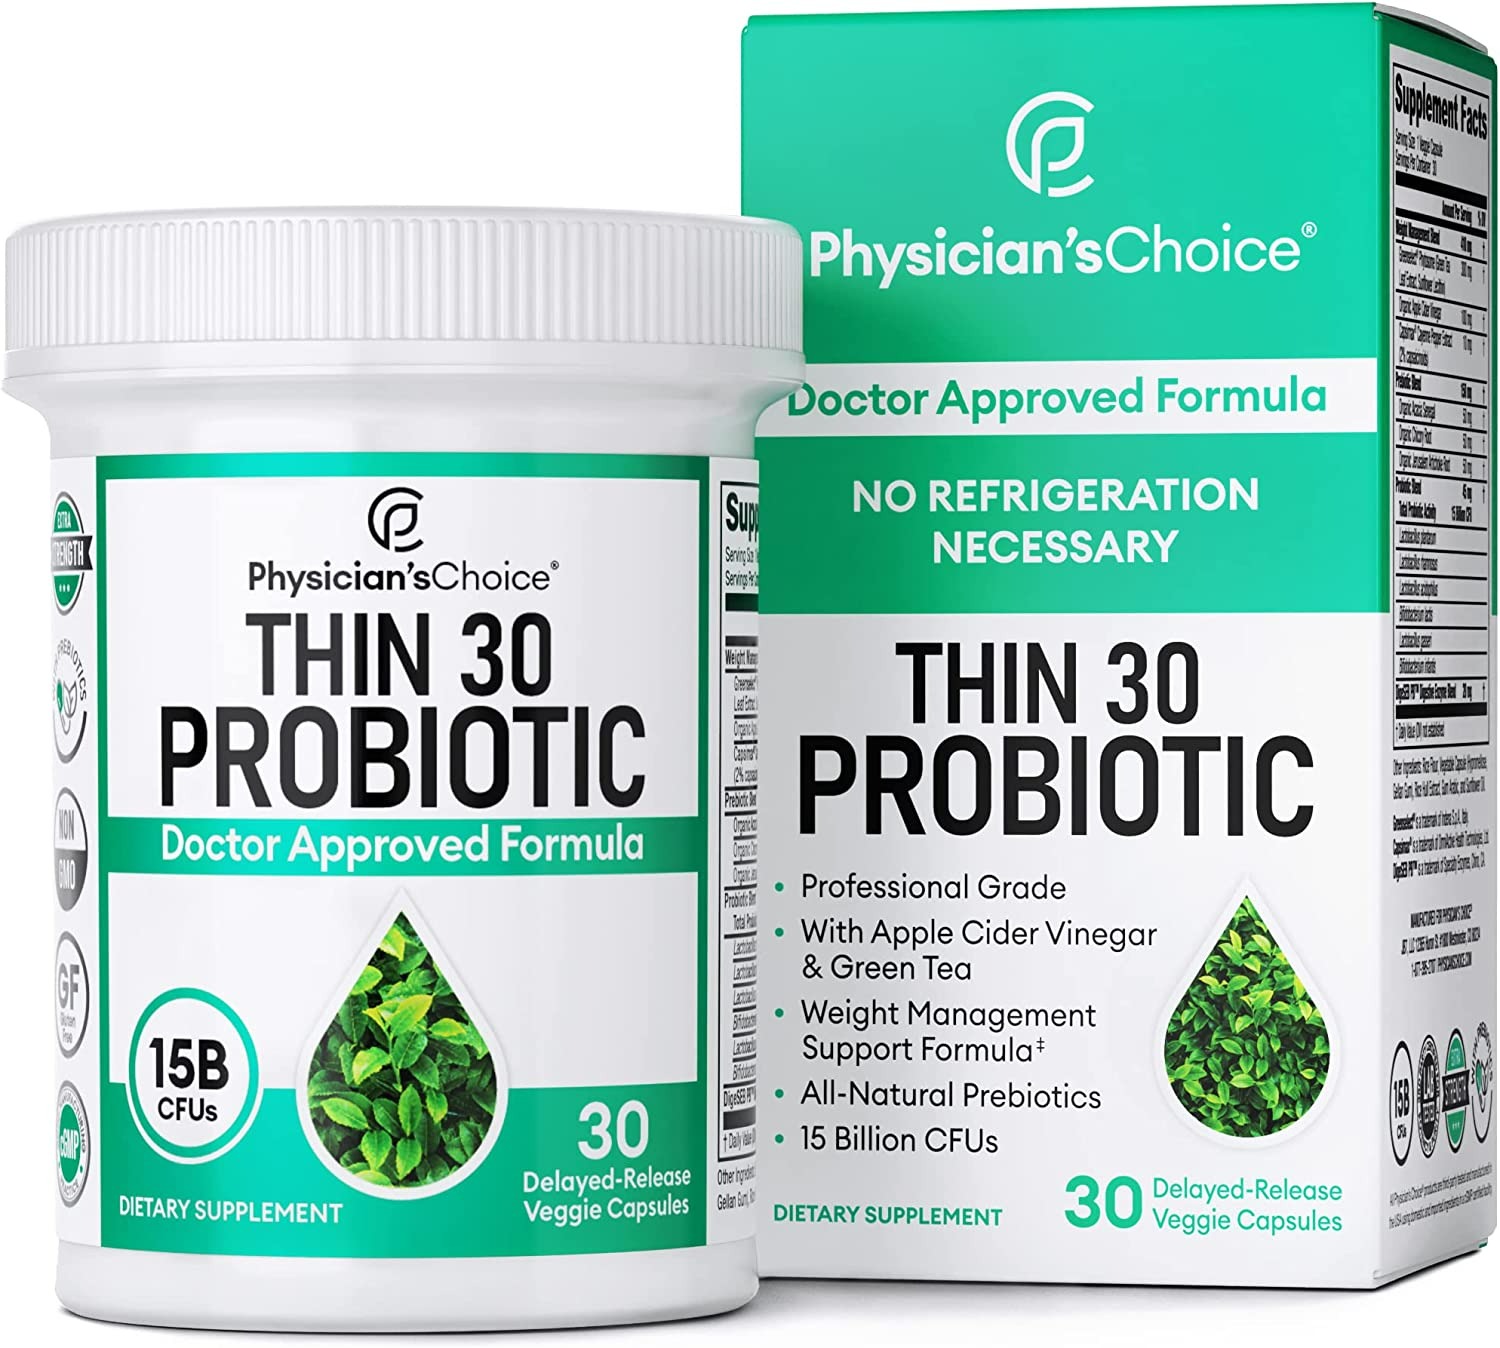 Physician's Choice Probiotics for Weight Management & Bloating- 6 Probiotic Strains - 30 Adet